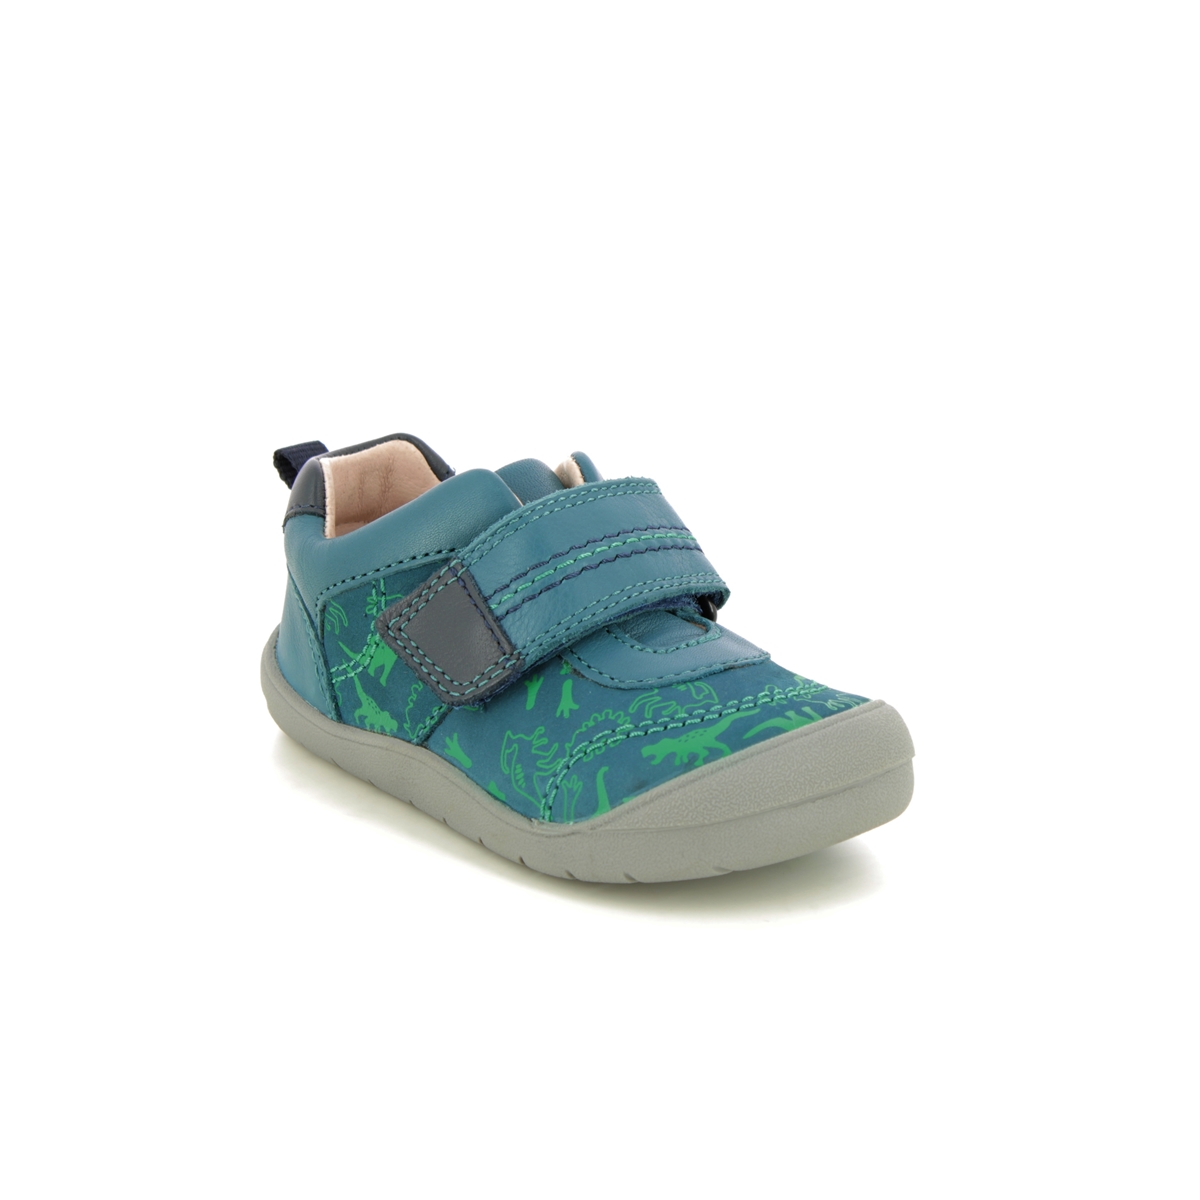 Start Rite - Footprint In Teal Blue 0769-46F In Size 6.5 In Plain Teal Blue Boys First And Toddler Shoes  In Teal Blue For kids